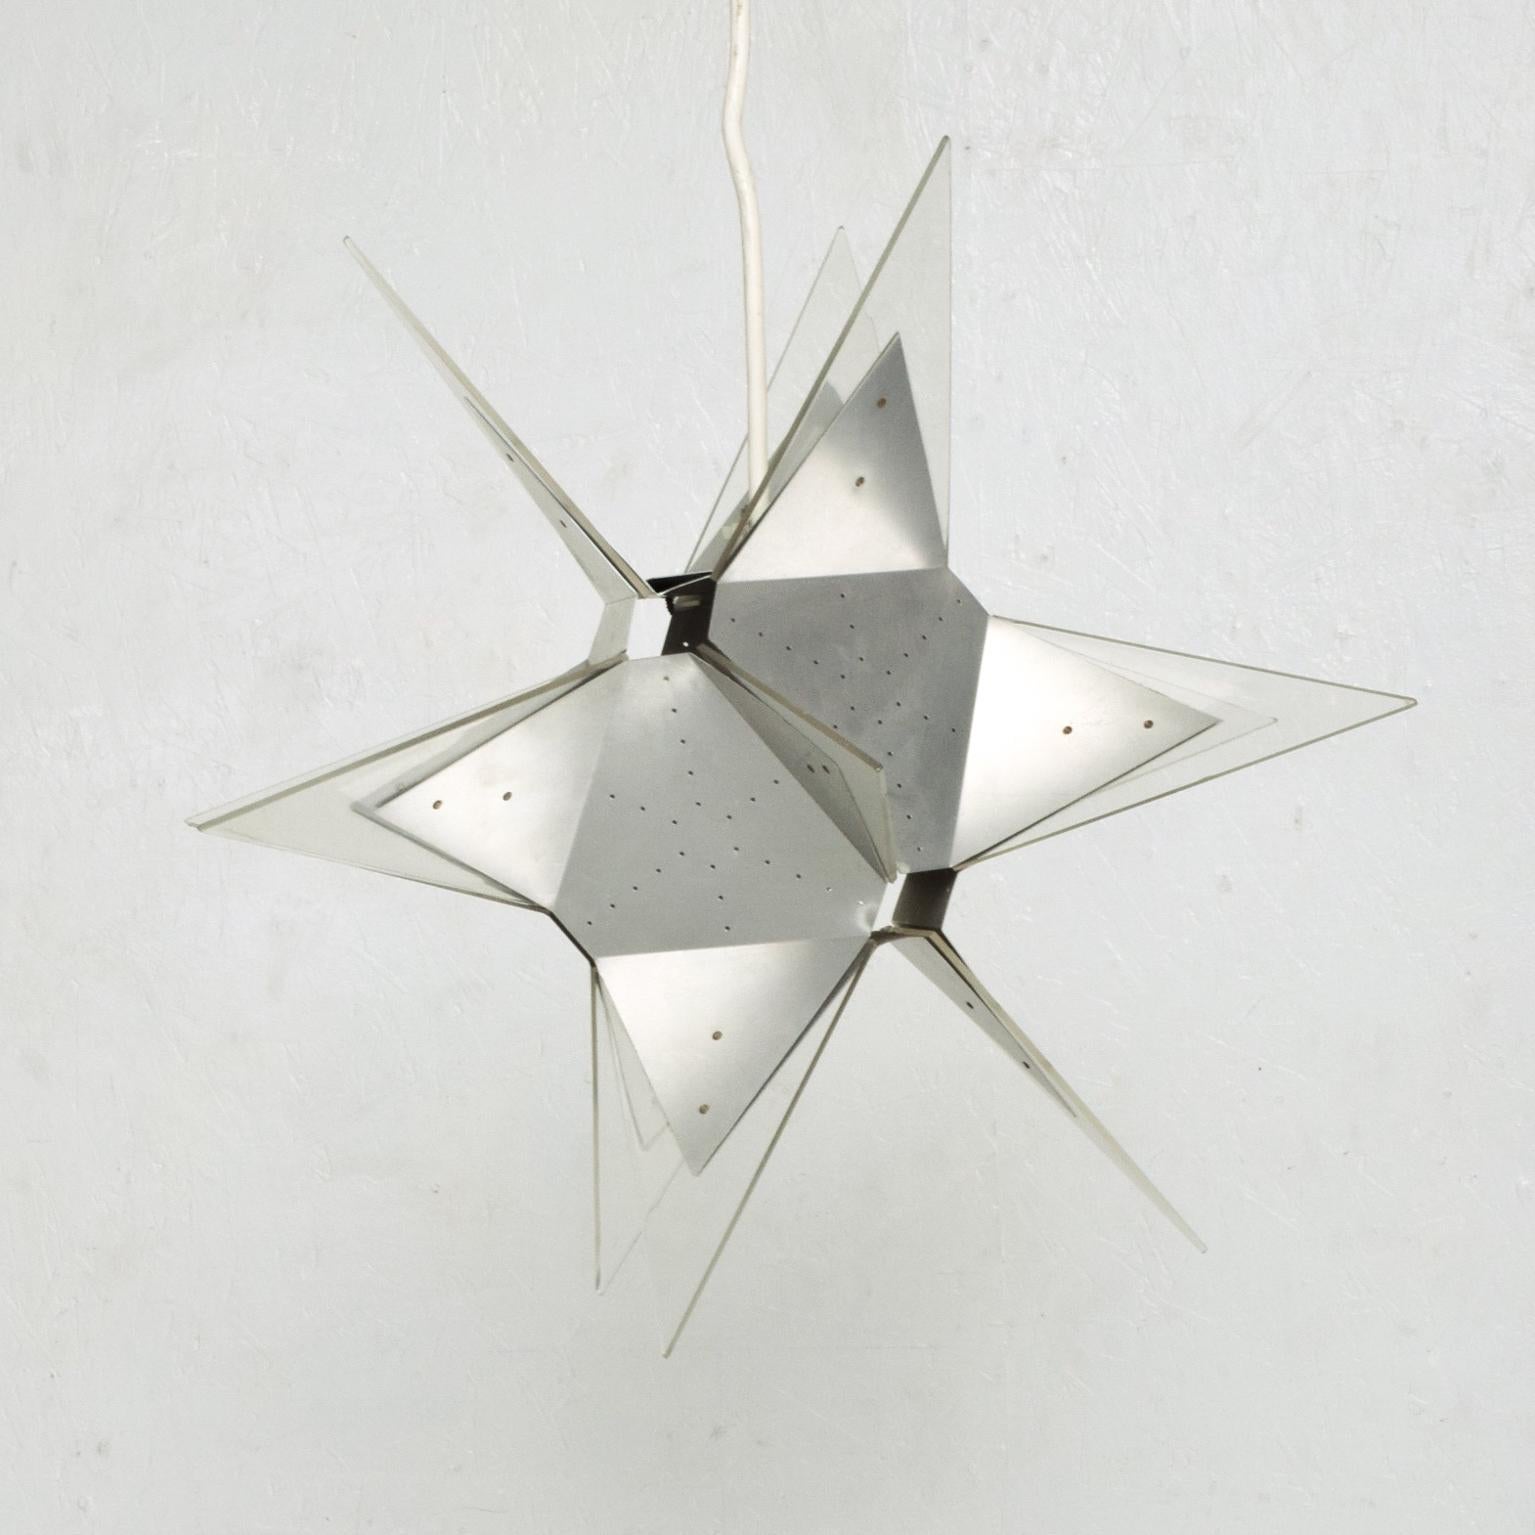 For your consideration a rare Mid-Century Modern Pop Art aluminum and plexiglass Moravian Star pendant lamp. Italy, circa the 1960s. Dimensions: H 16.5 in. x D 20 in.20